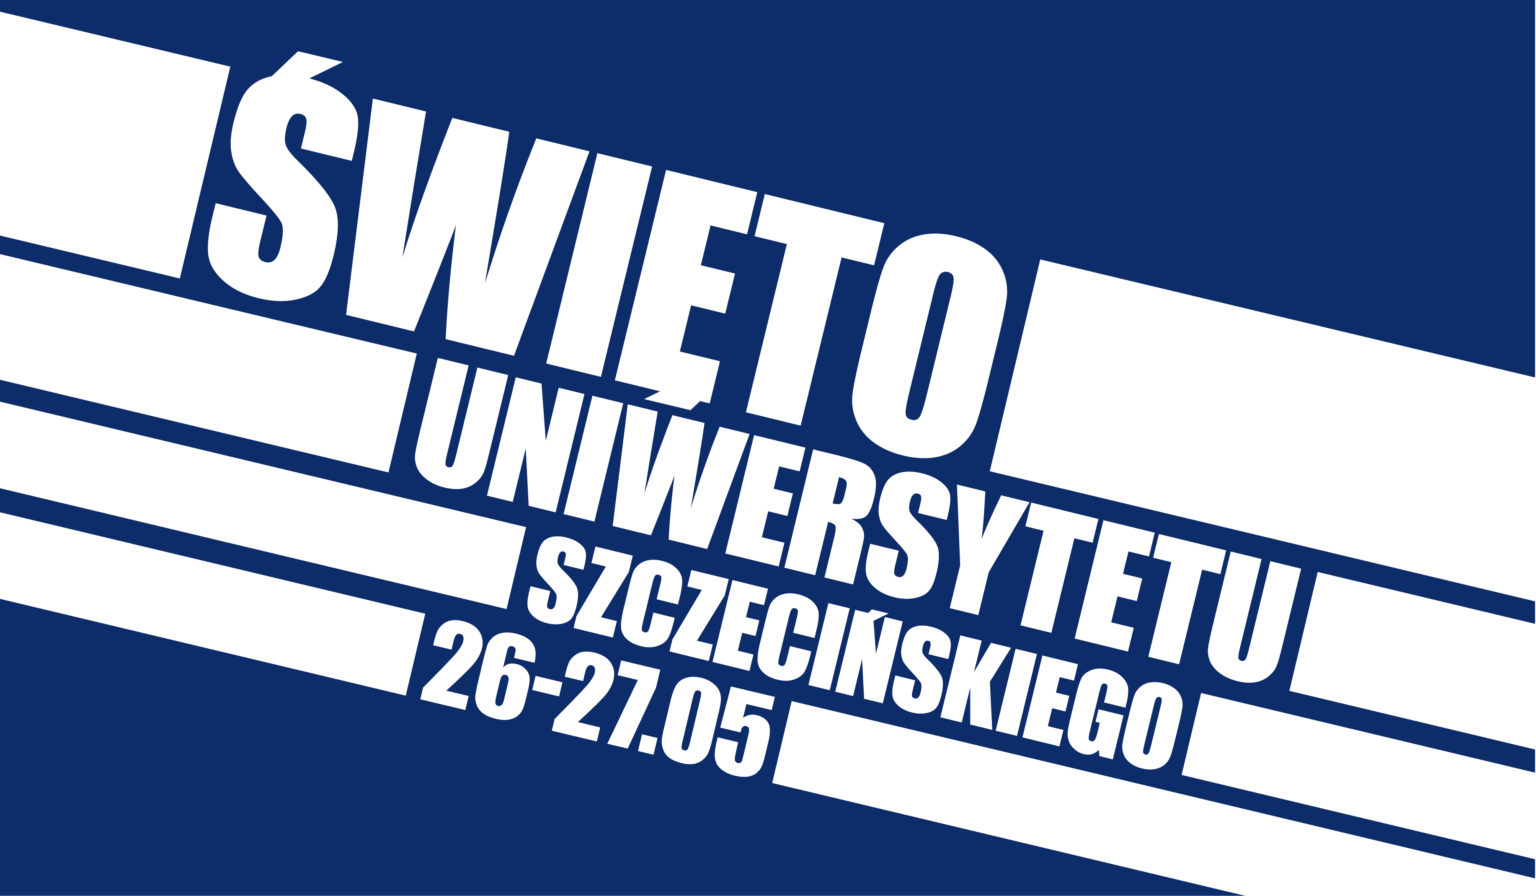 Invitation to the Feast of the University of Szczecin!